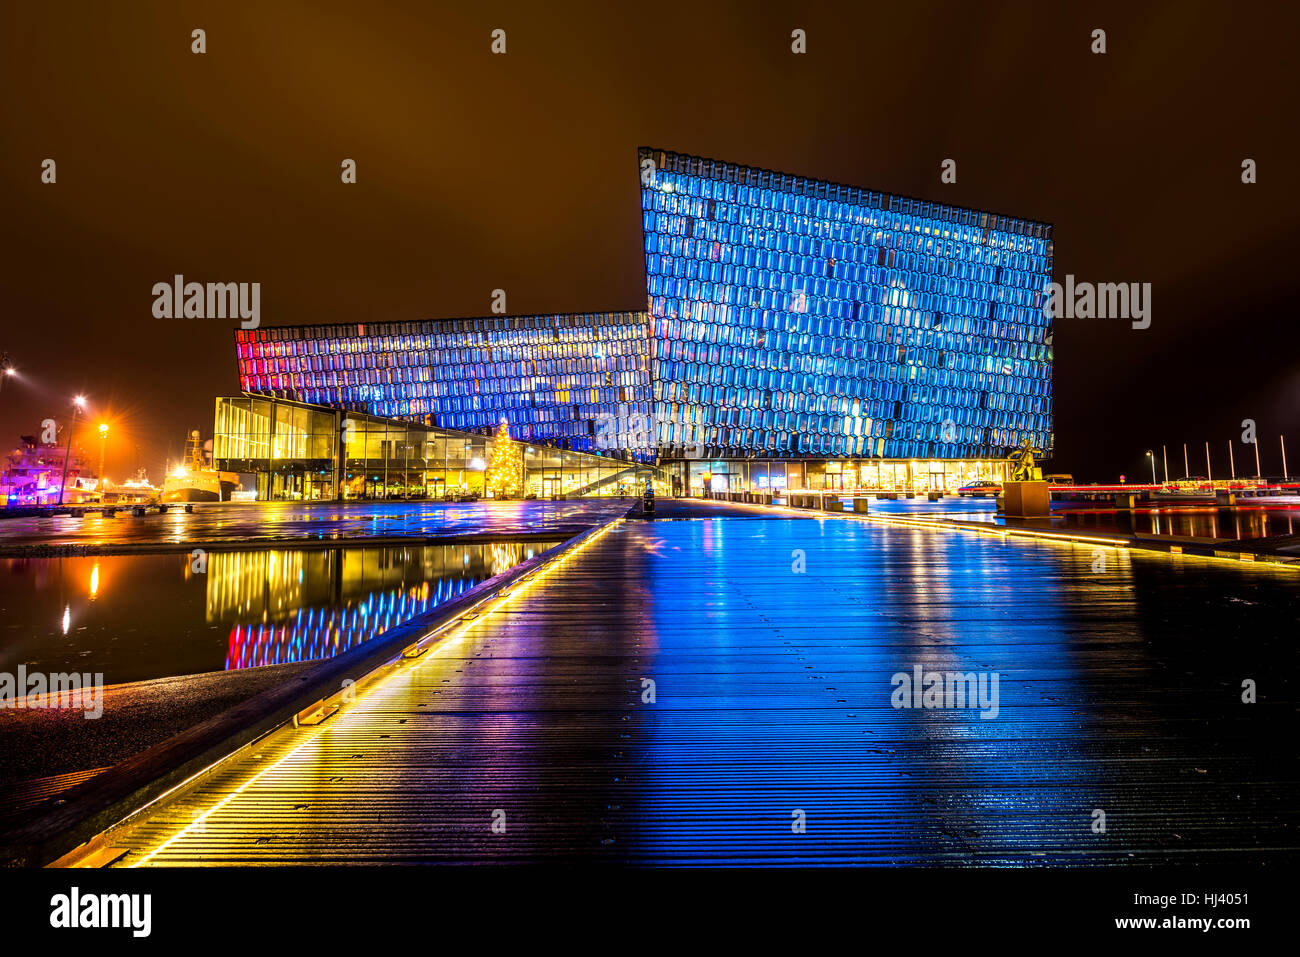 Harpa concert hall in Iceland at night lights up in multiple colors, reflecting on a pool at the front of the building. Stock Photo